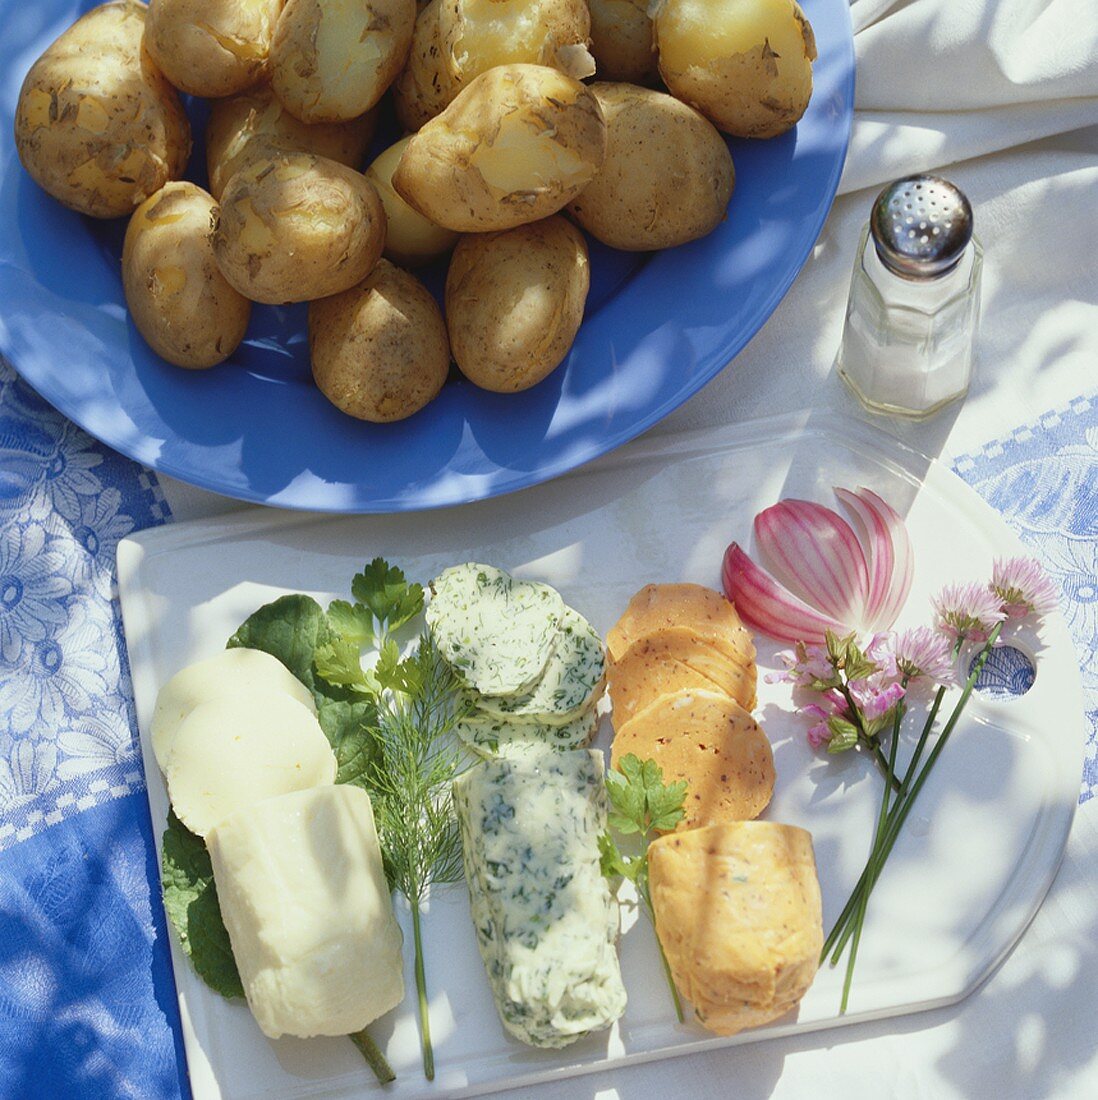 Rolls of seasoned butter & plate of potatoes cooked in skins